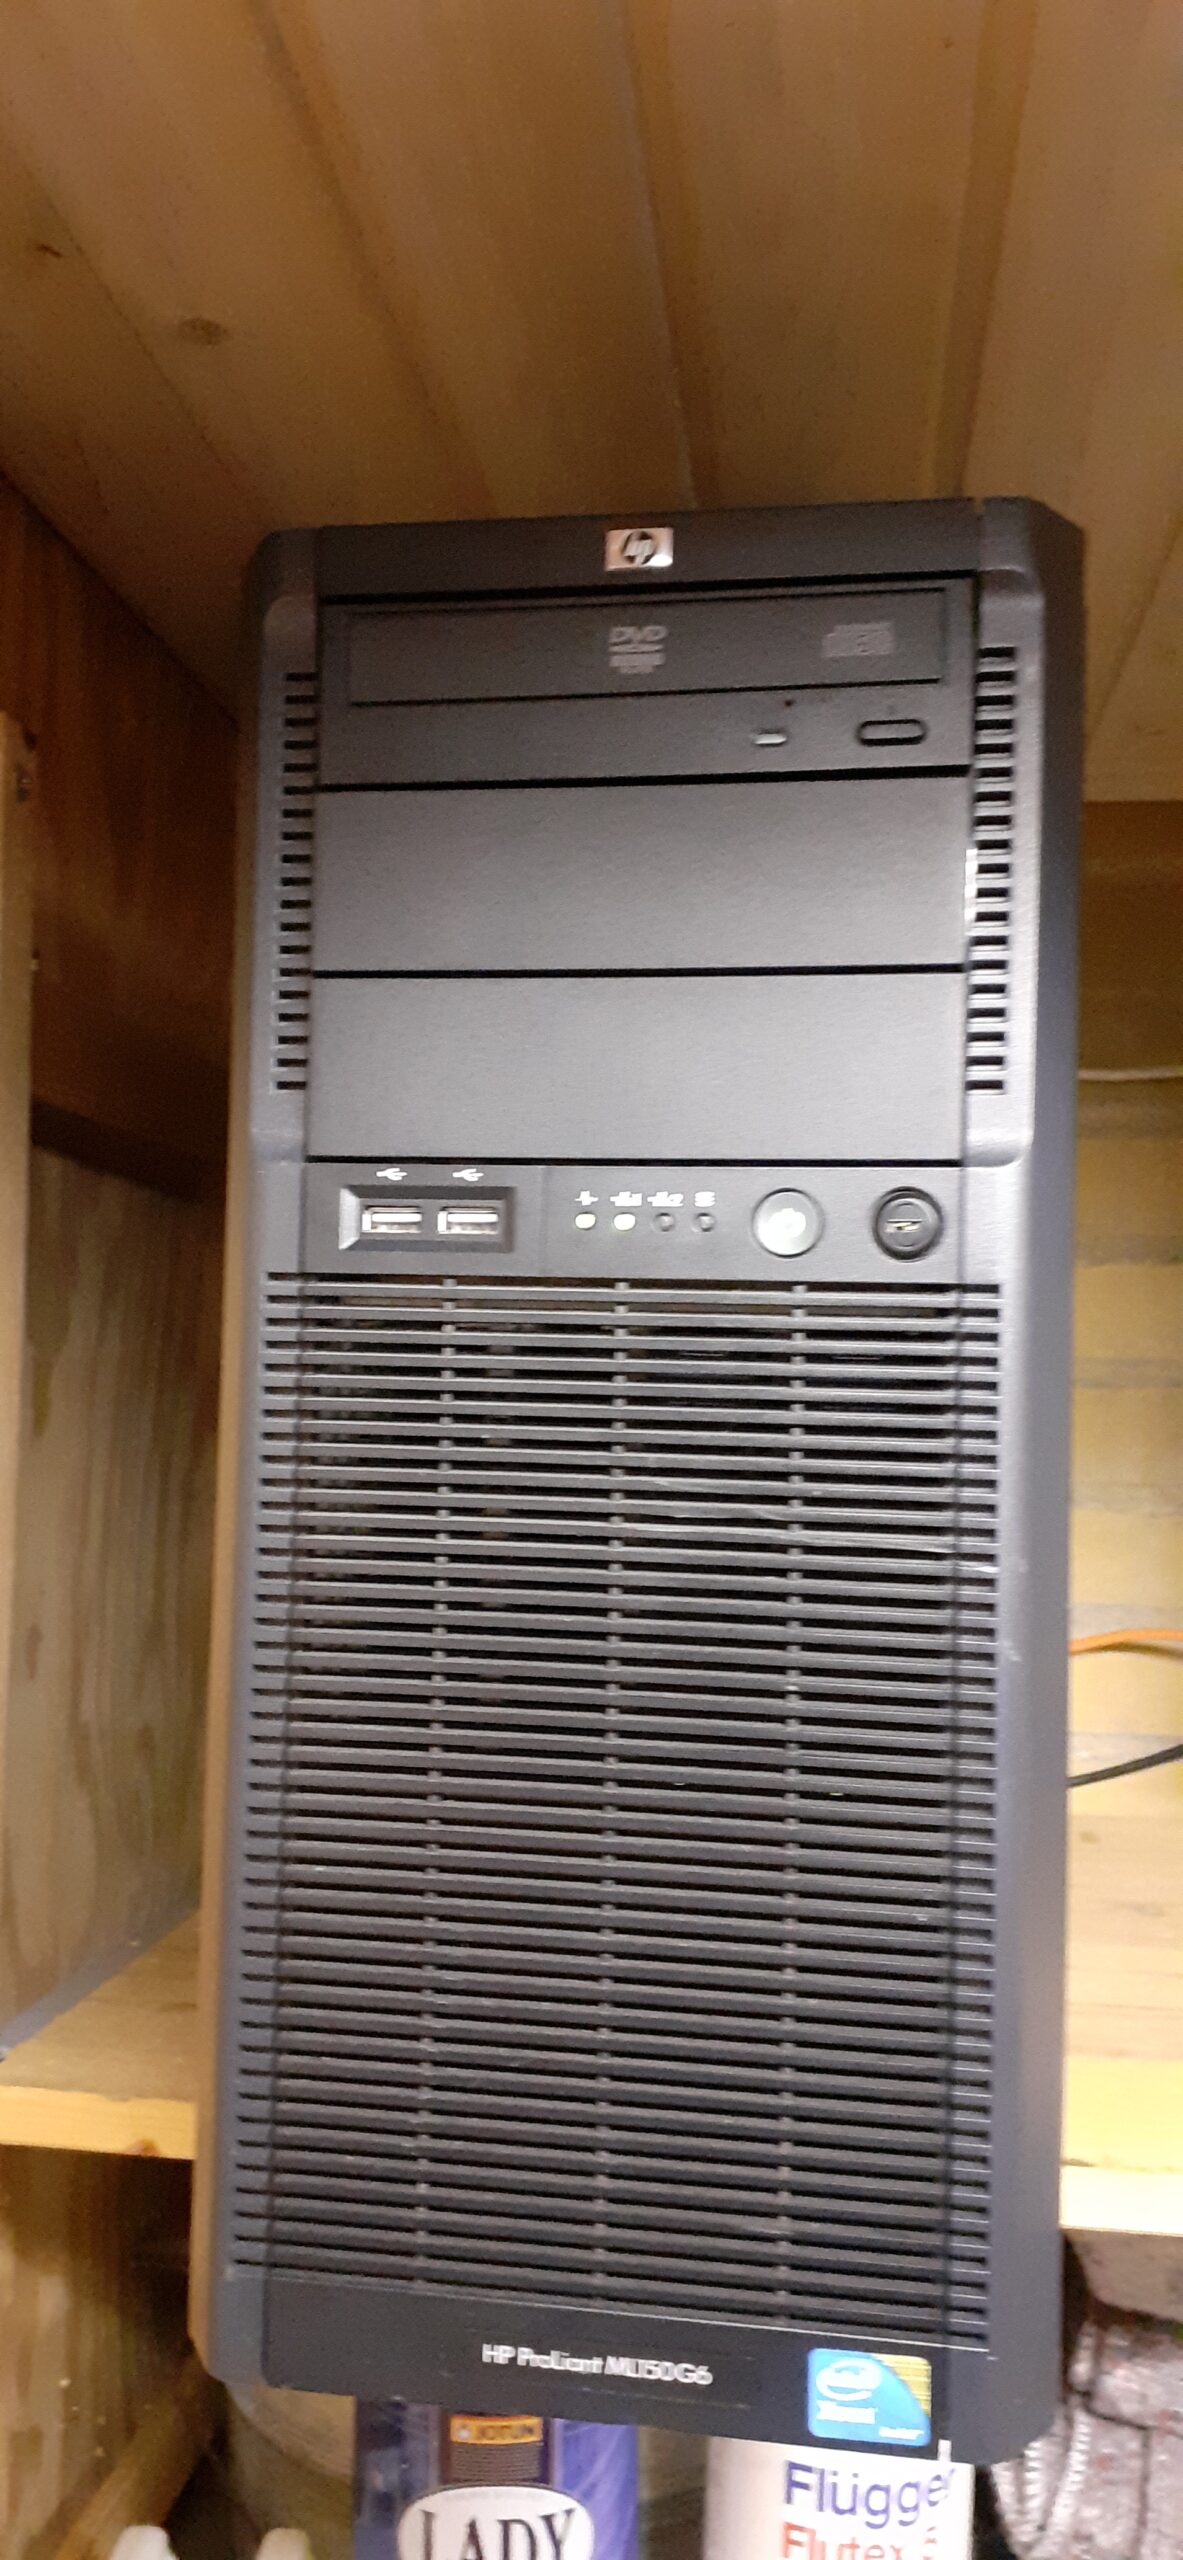 HP Proliant ML150 G6 server front view